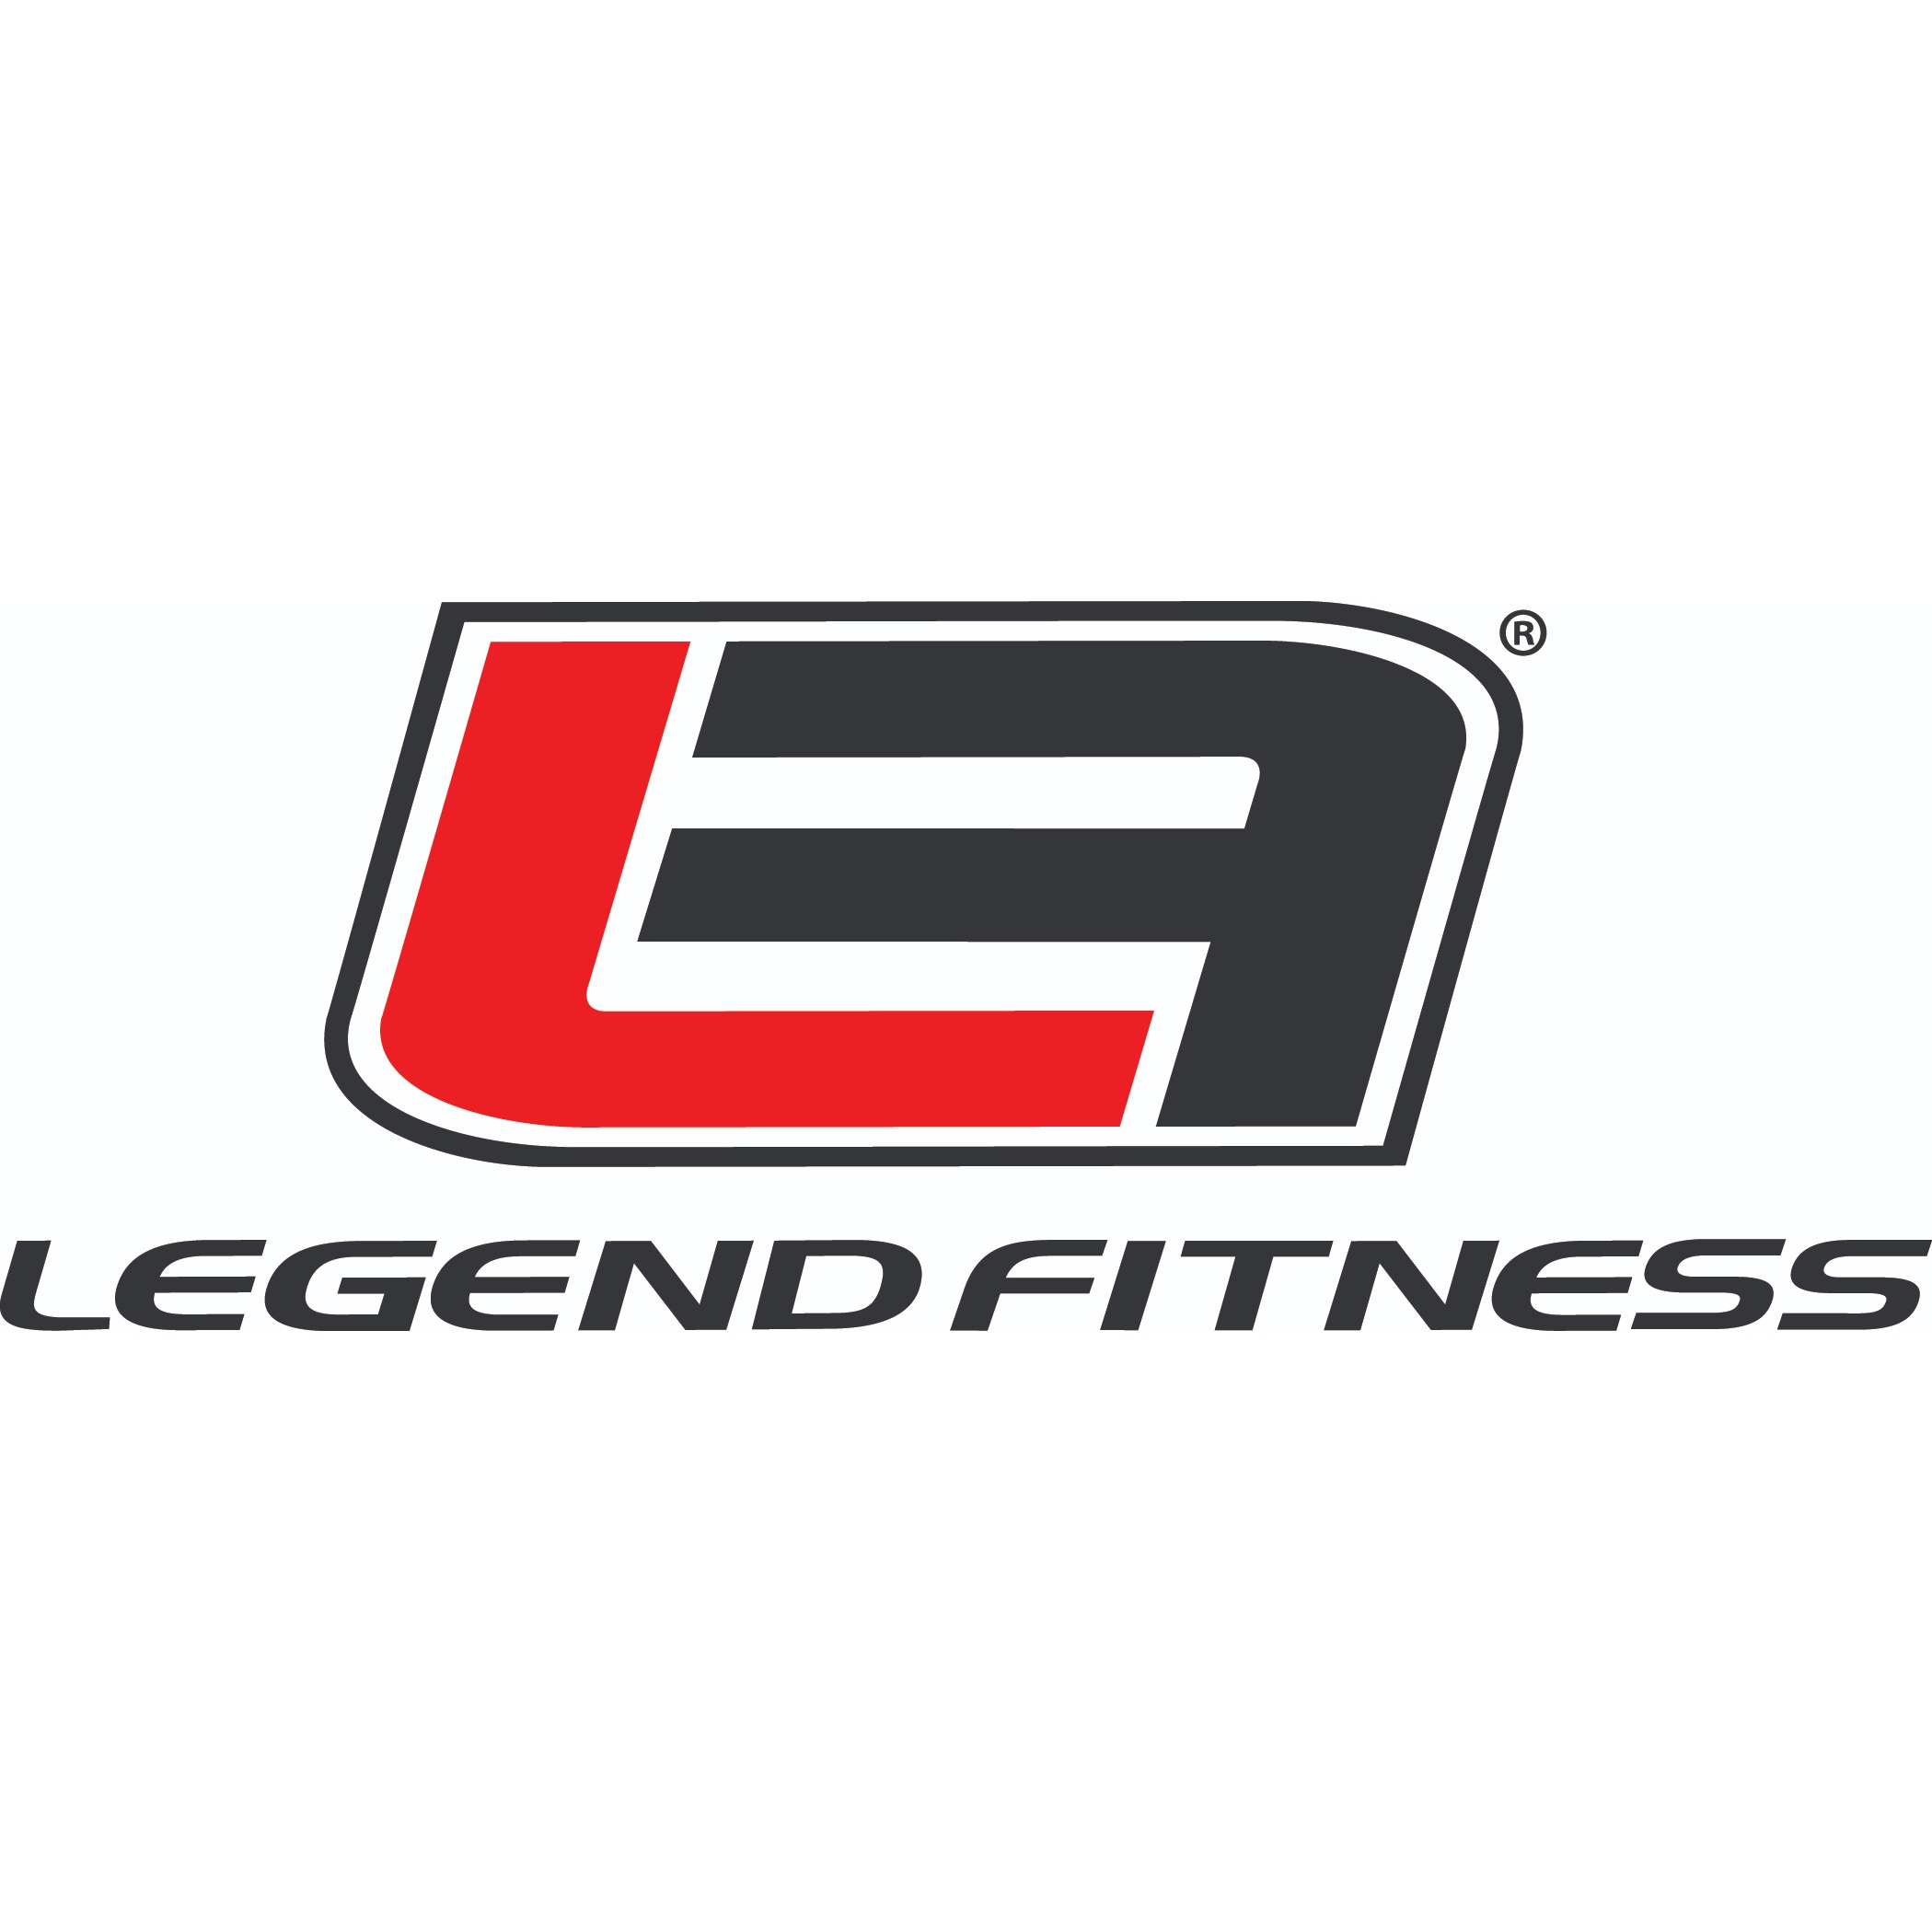 Legend Fitness - Knoxville, TN 37909 - (865)992-7097 | ShowMeLocal.com